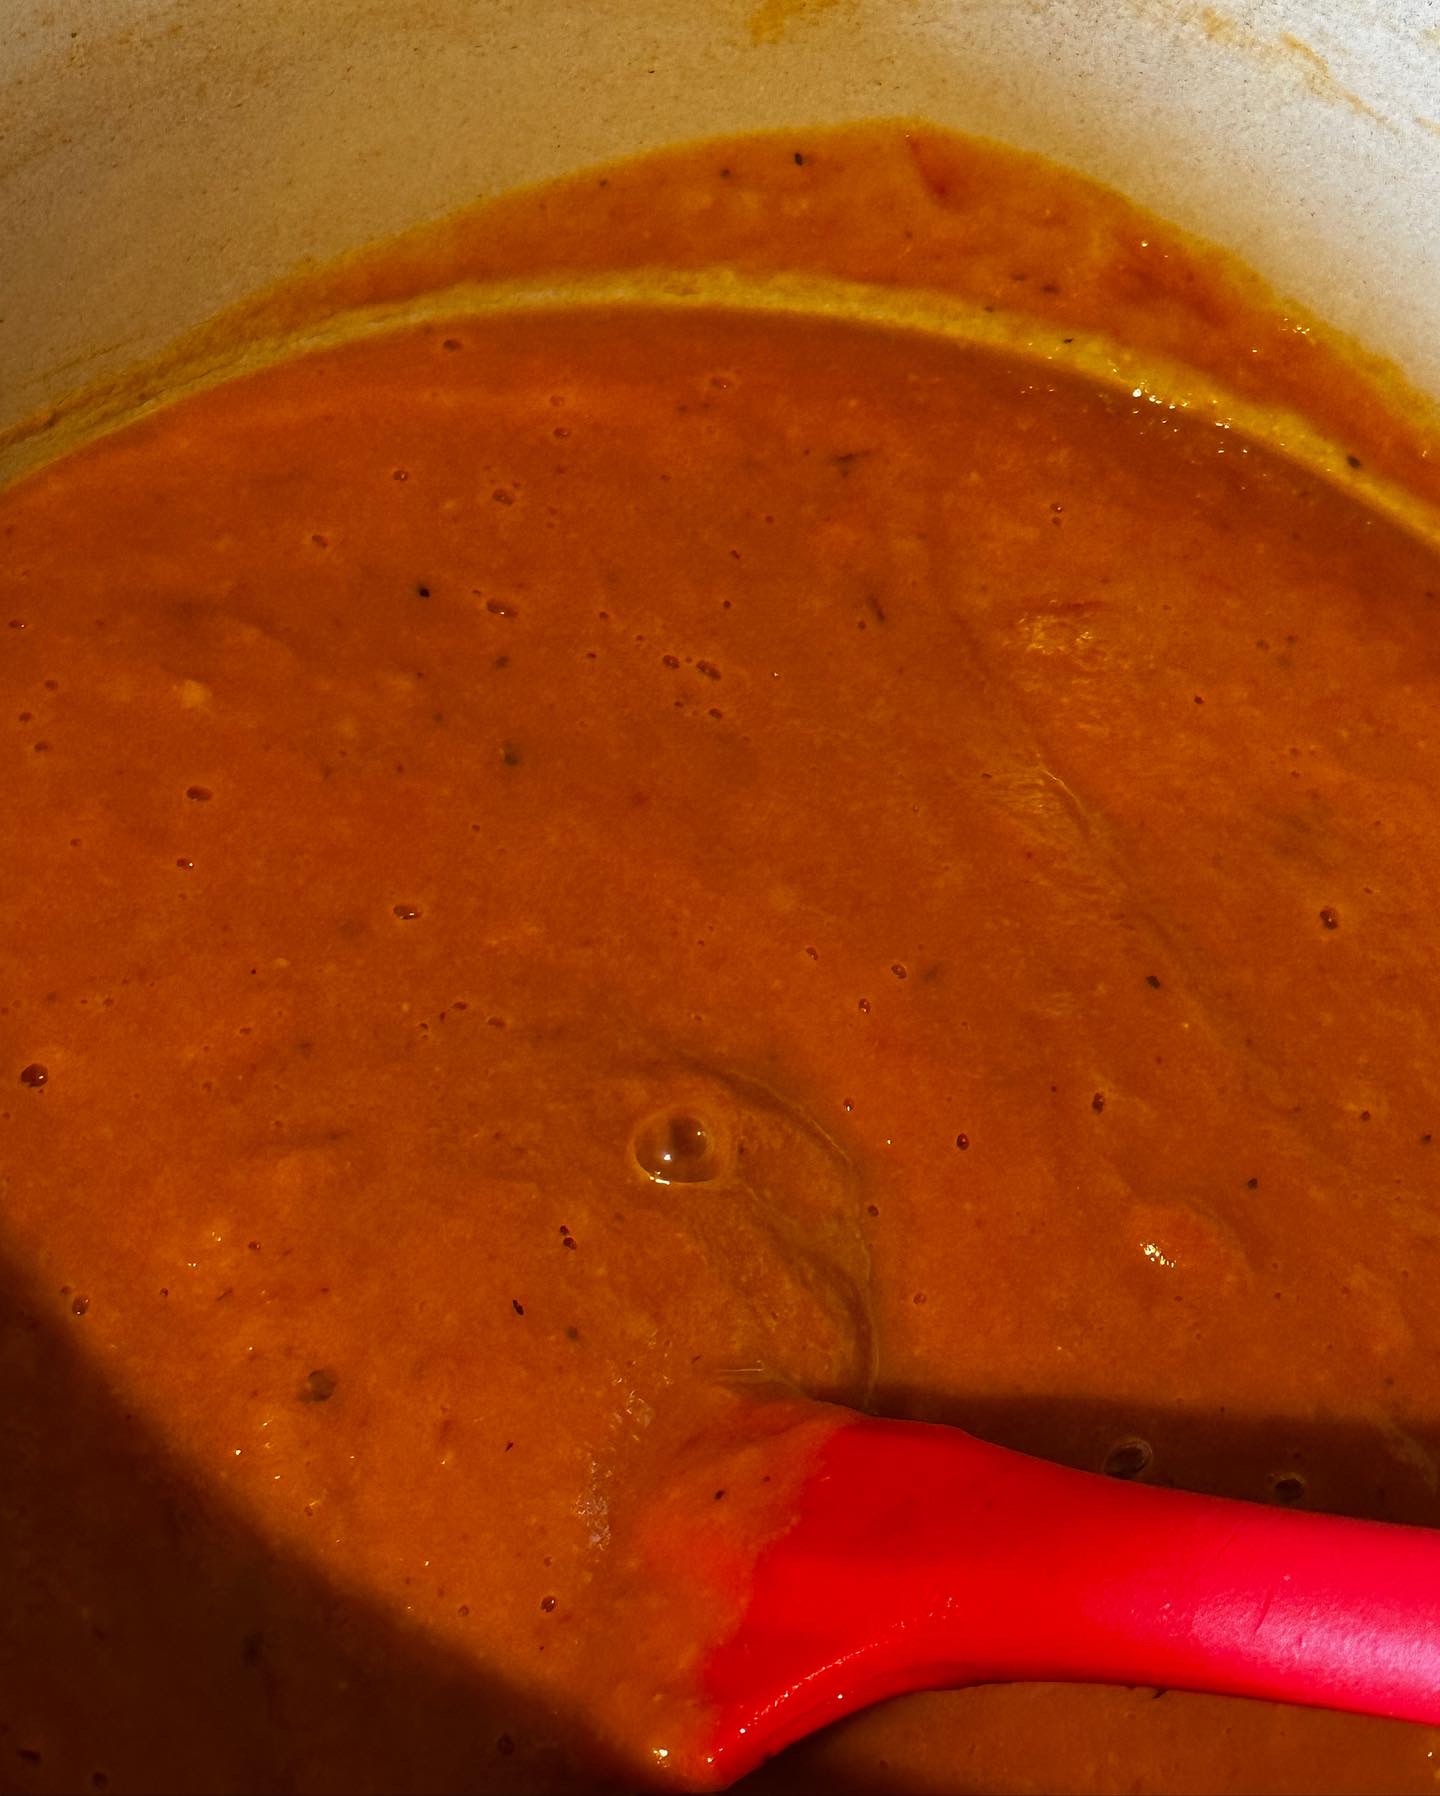 The finished sauce